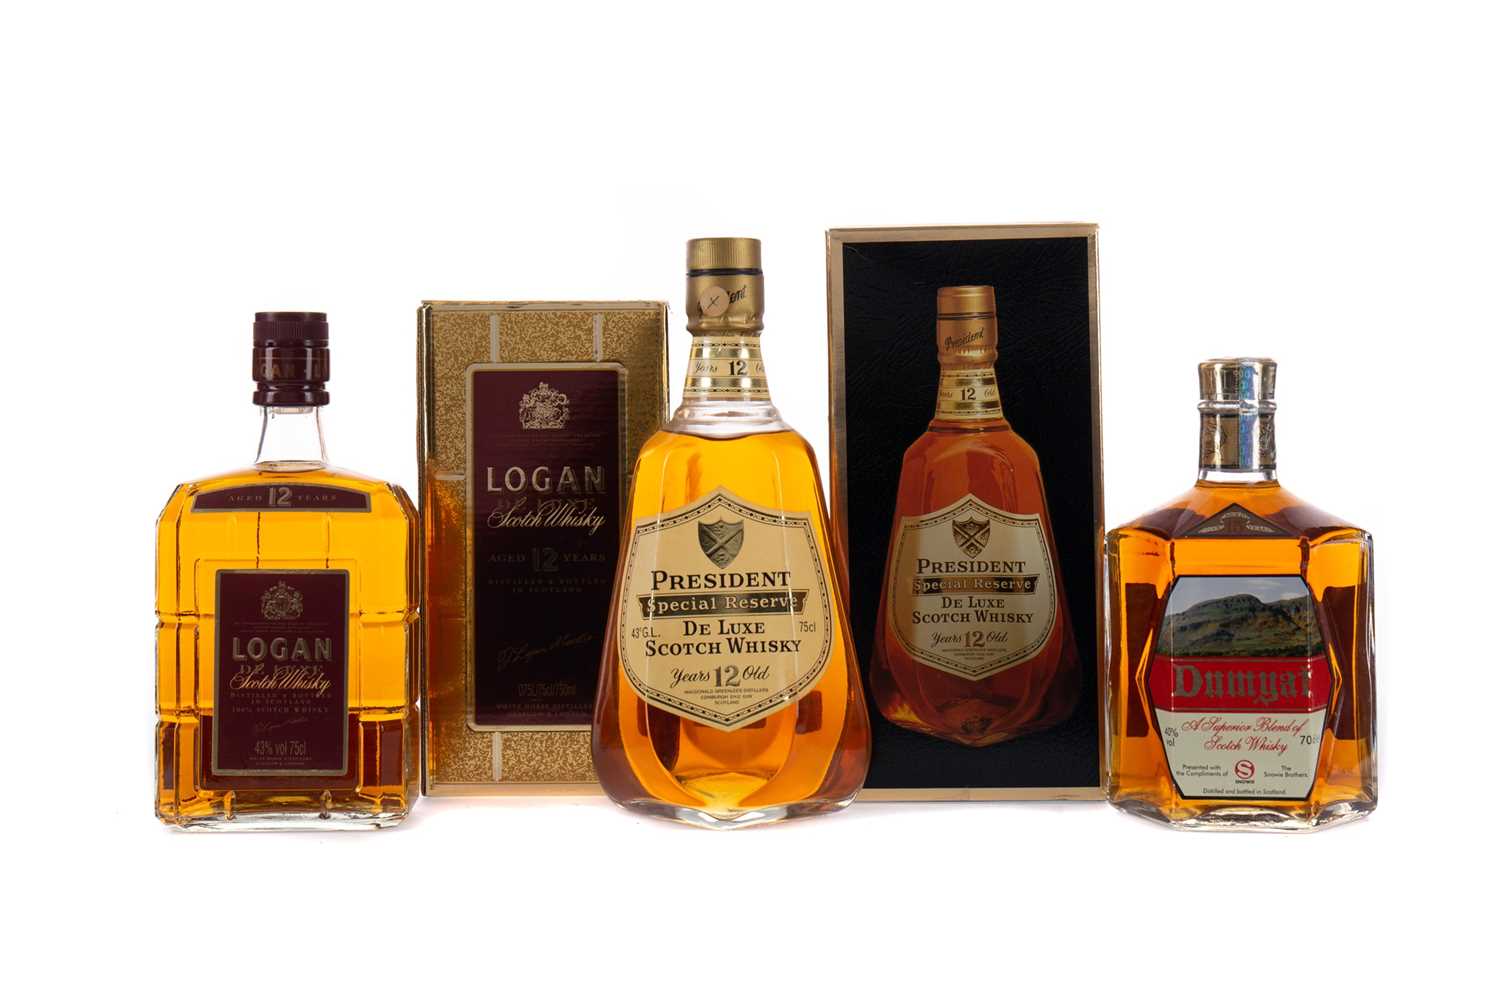 Lot 23 - PRESIDENT SPECIAL RESERVE 12 YEARS OLD, LOGAN DELUXE, AND SCOTTISH LEADER 15 YEARS OLD